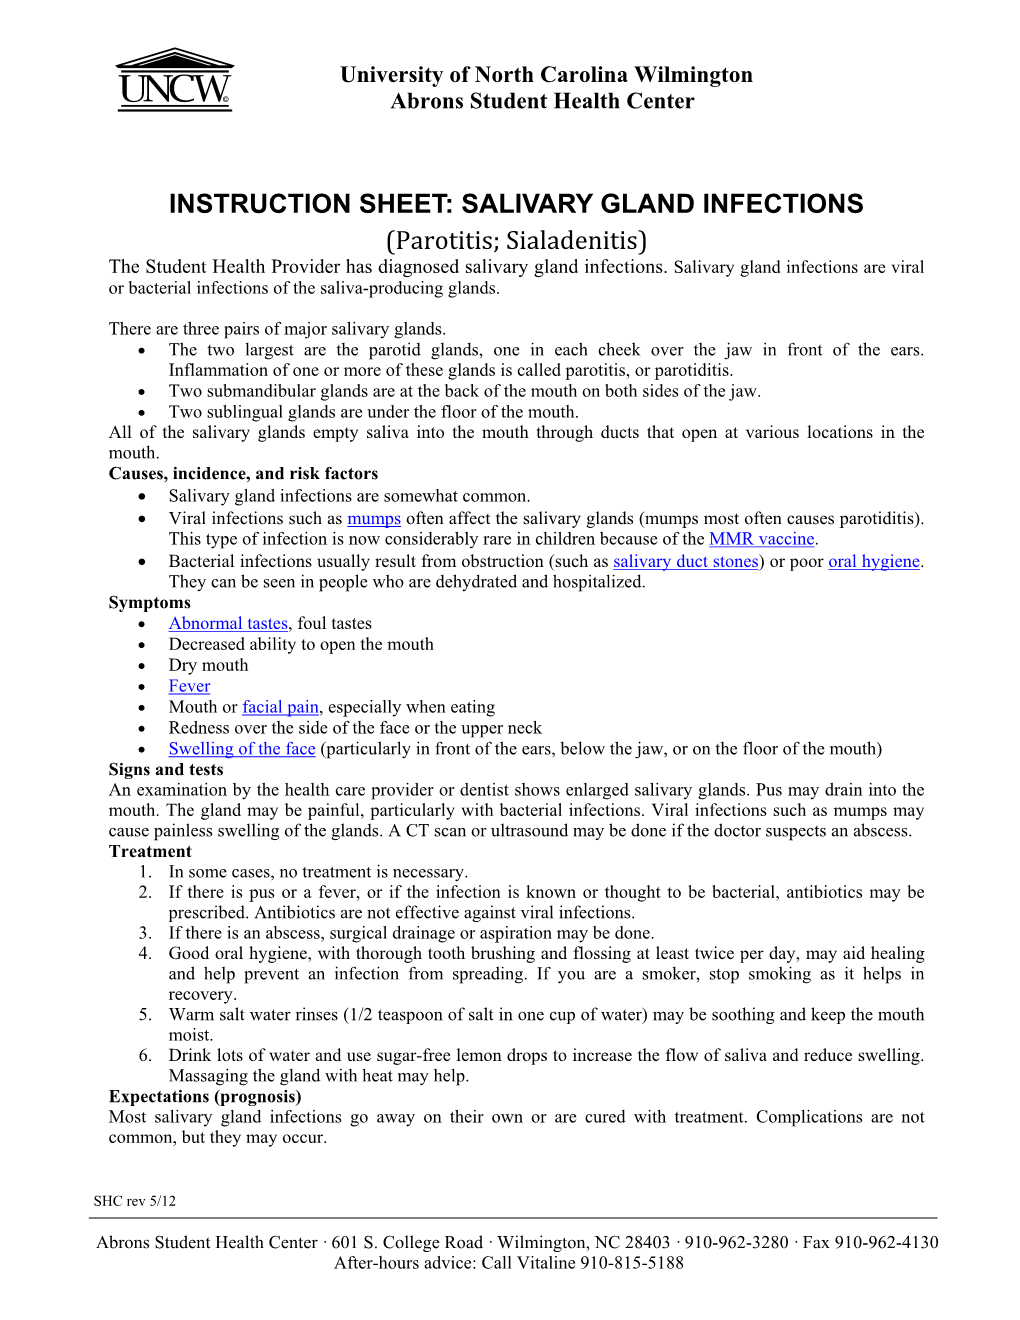 SALIVARY GLAND INFECTIONS (Parotitis; Sialadenitis) the Student Health Provider Has Diagnosed Salivary Gland Infections